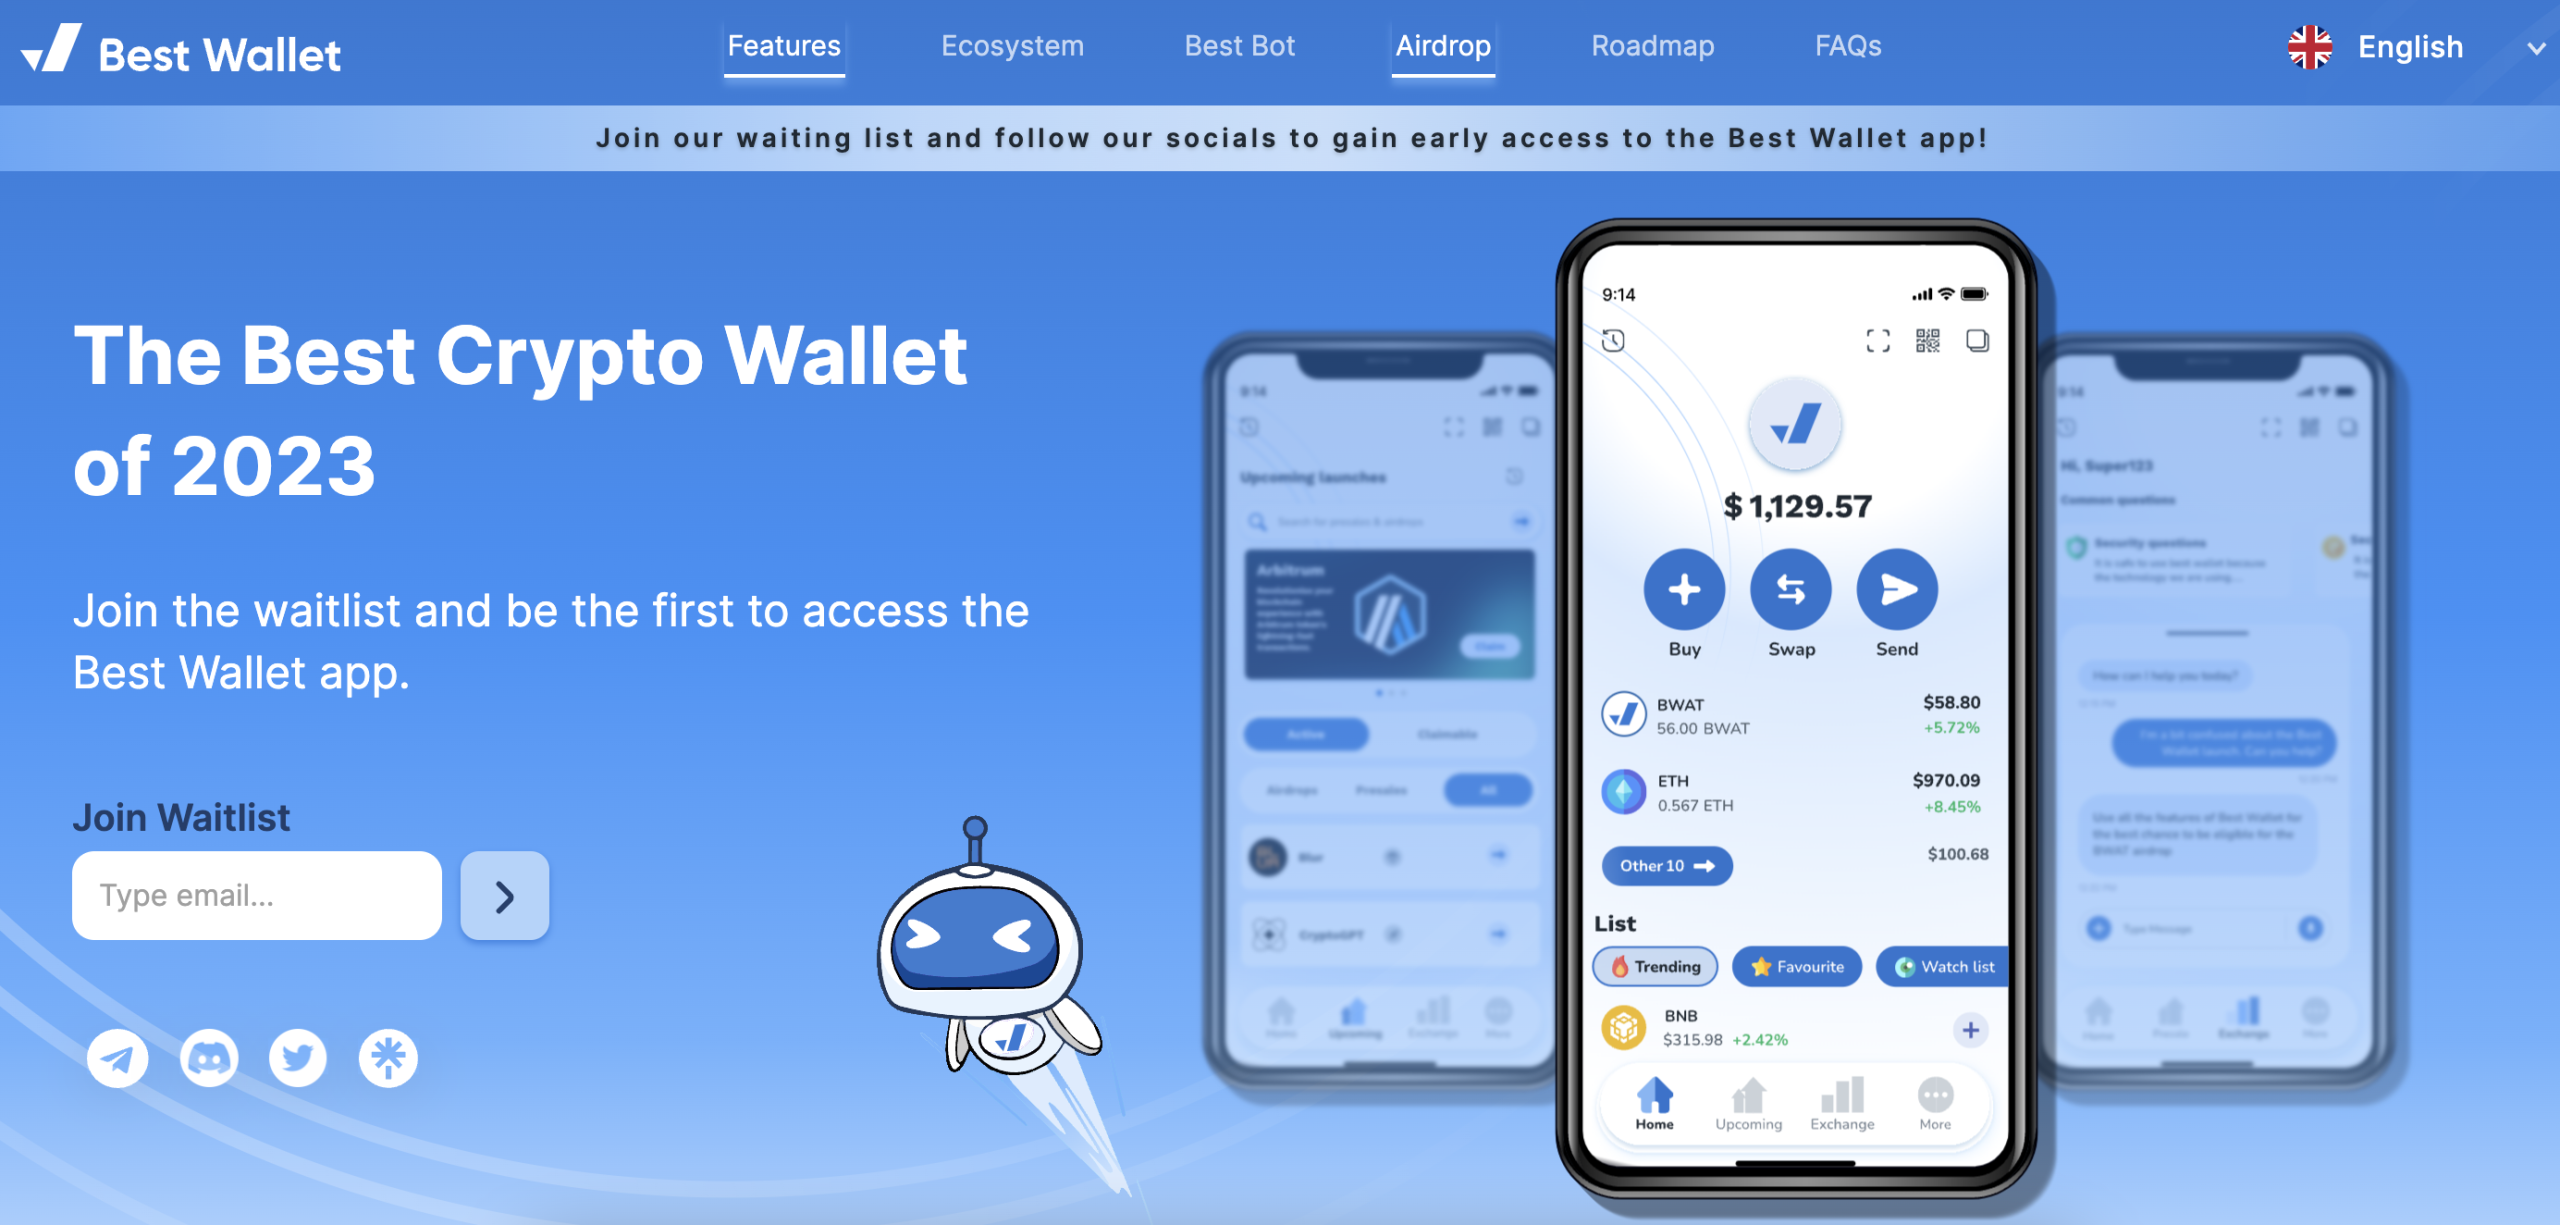 Best Wallet review 